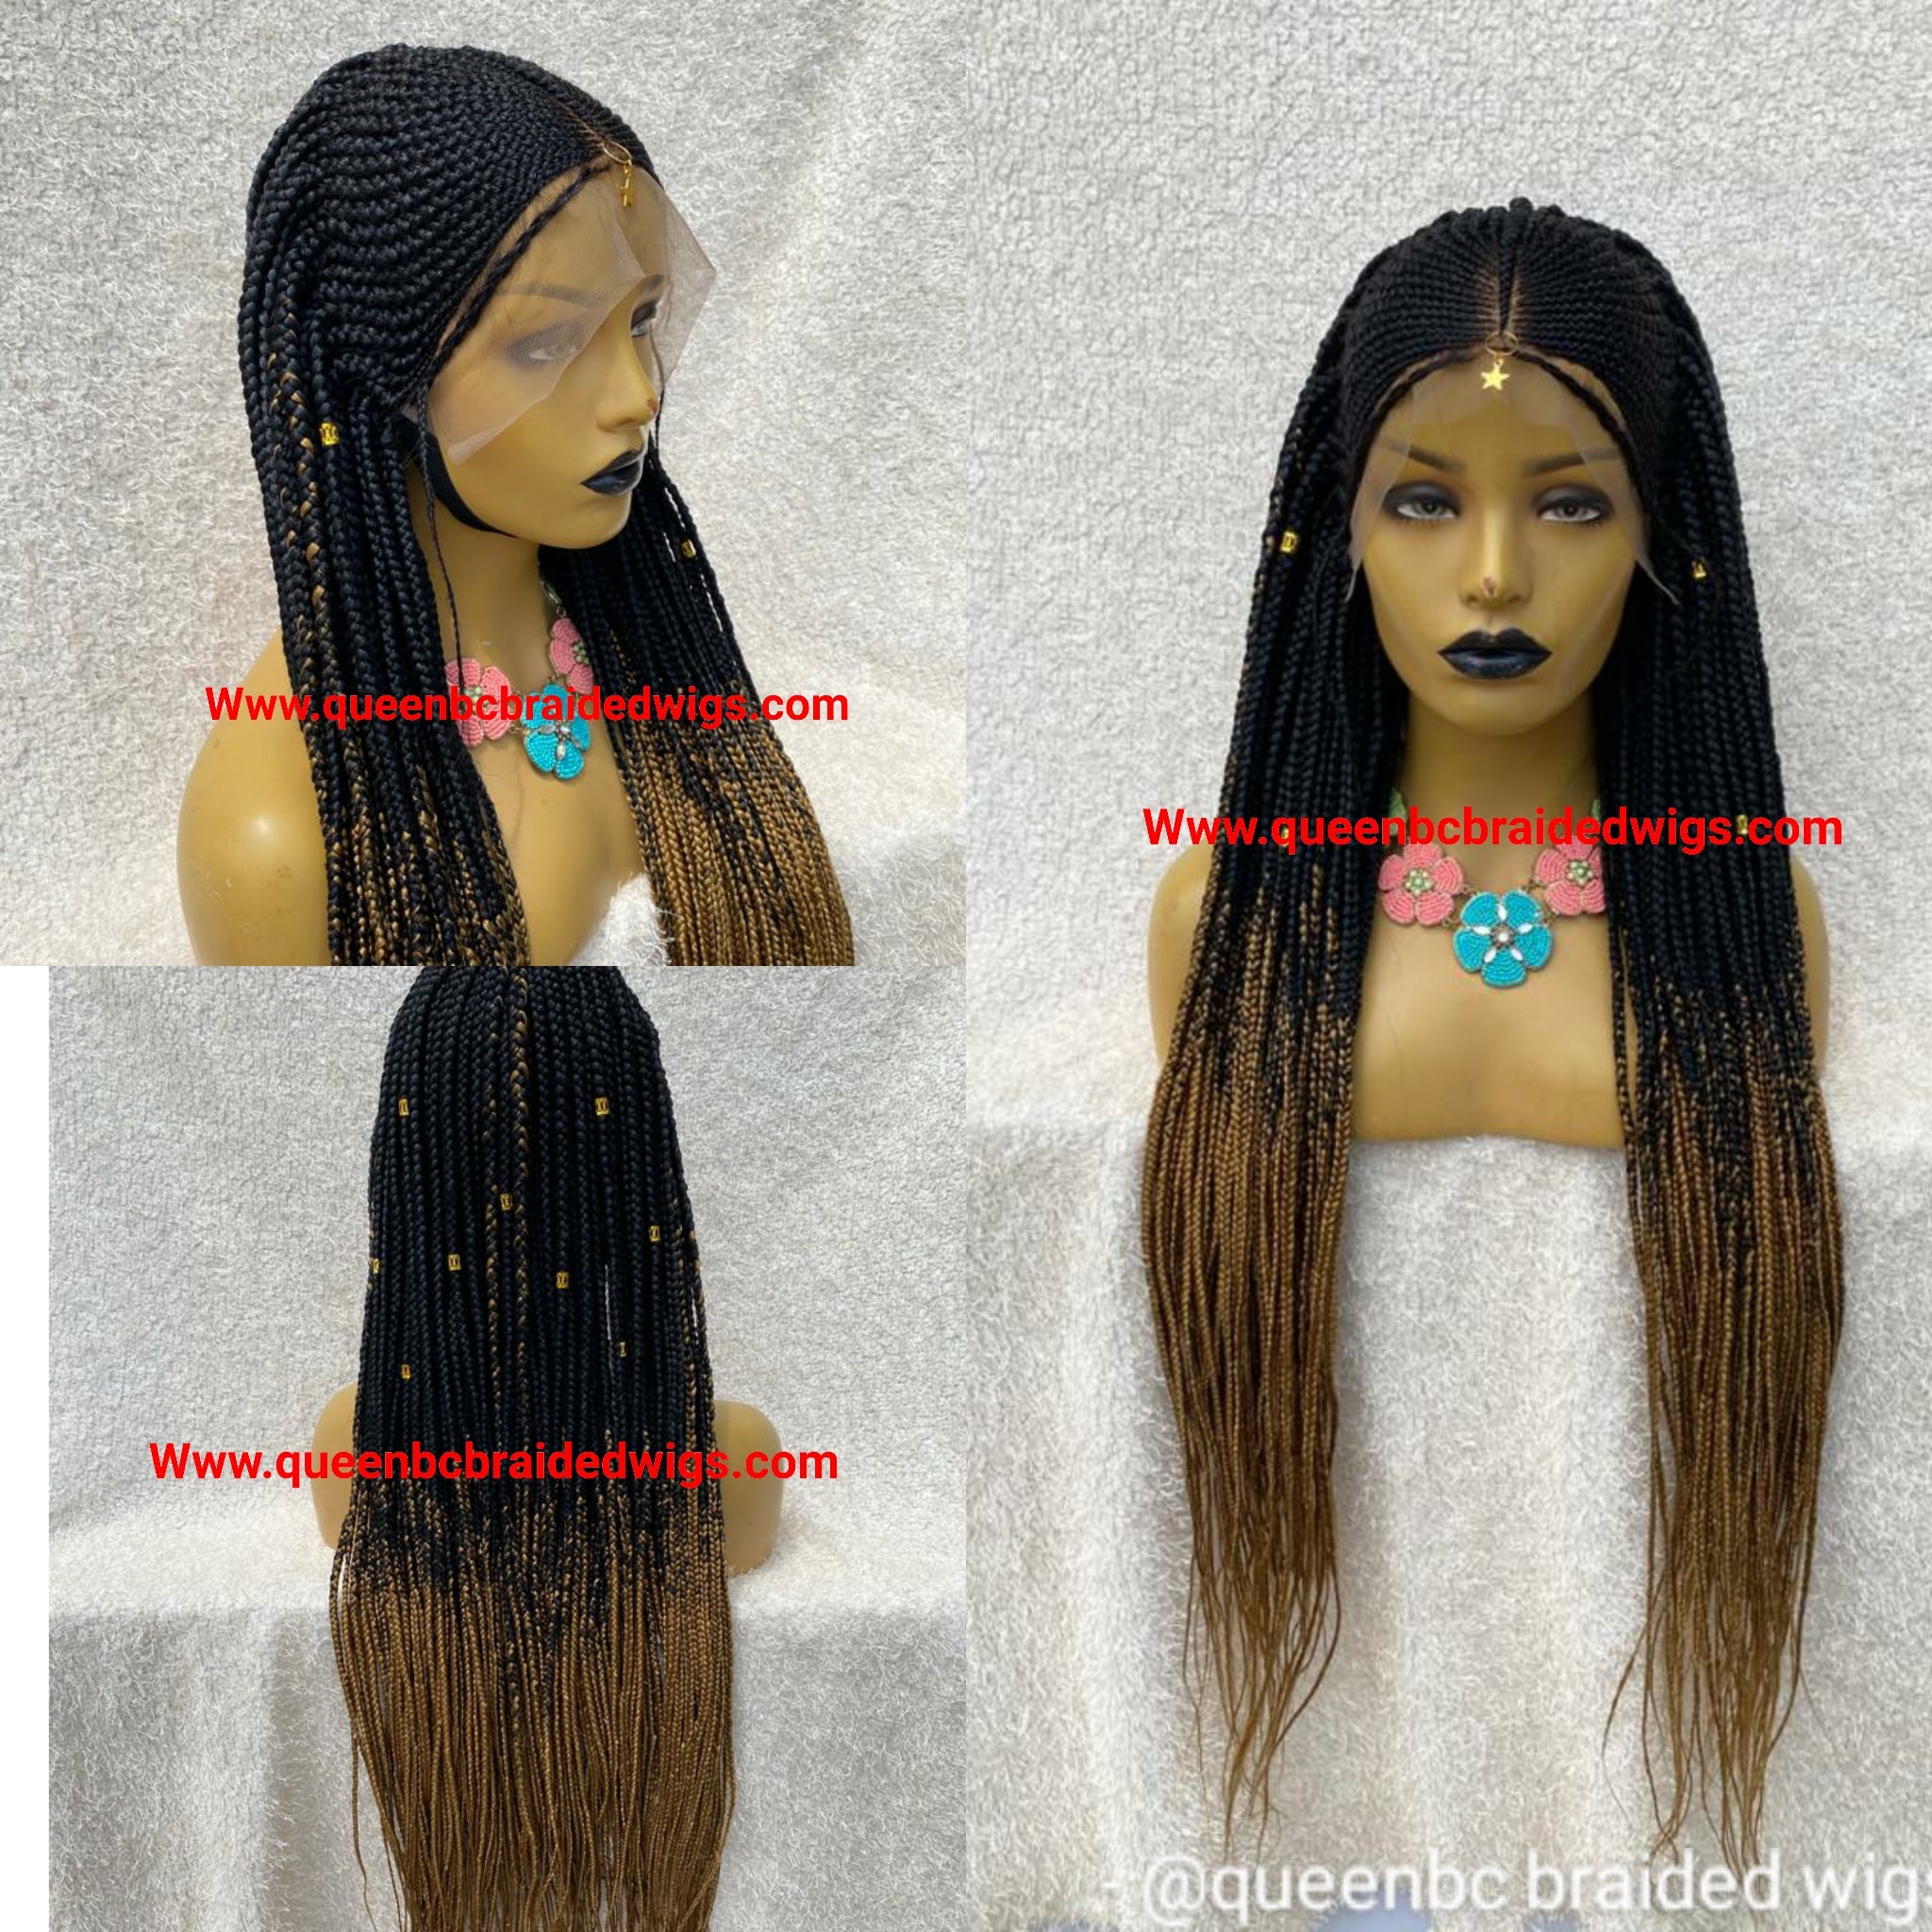 AFRICAN BRAIDED WIGS (SEVEN SEVEN BRAIDED STYLE) ON 13*6 FRONTAL CLOSU –  d.glitterzwigs